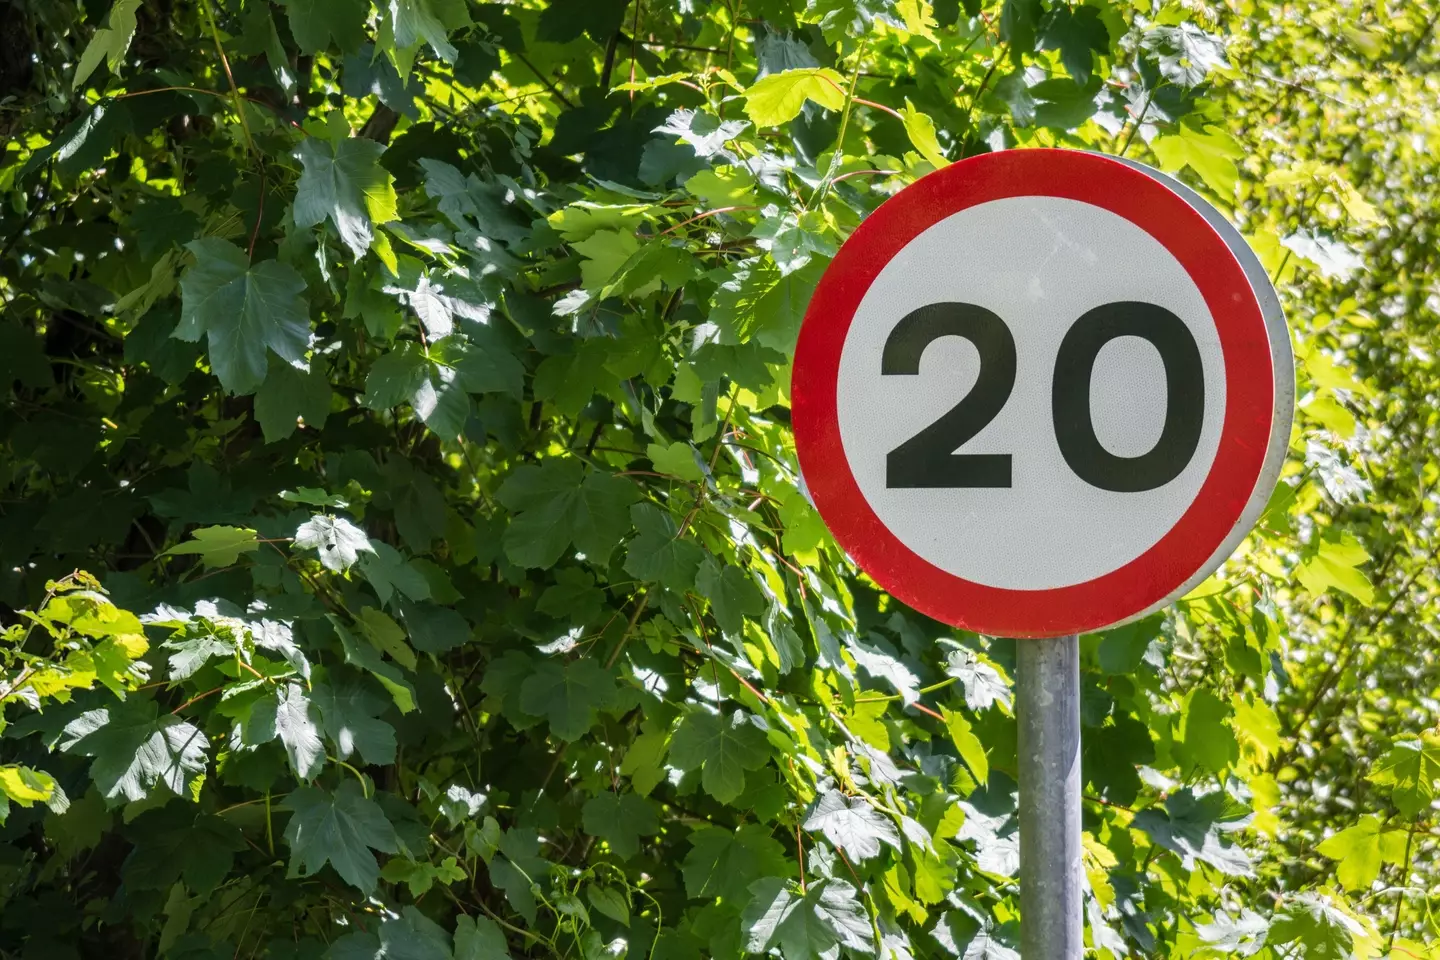 Surrey has become the first Council to introduce a 20mph limit on some country roads.